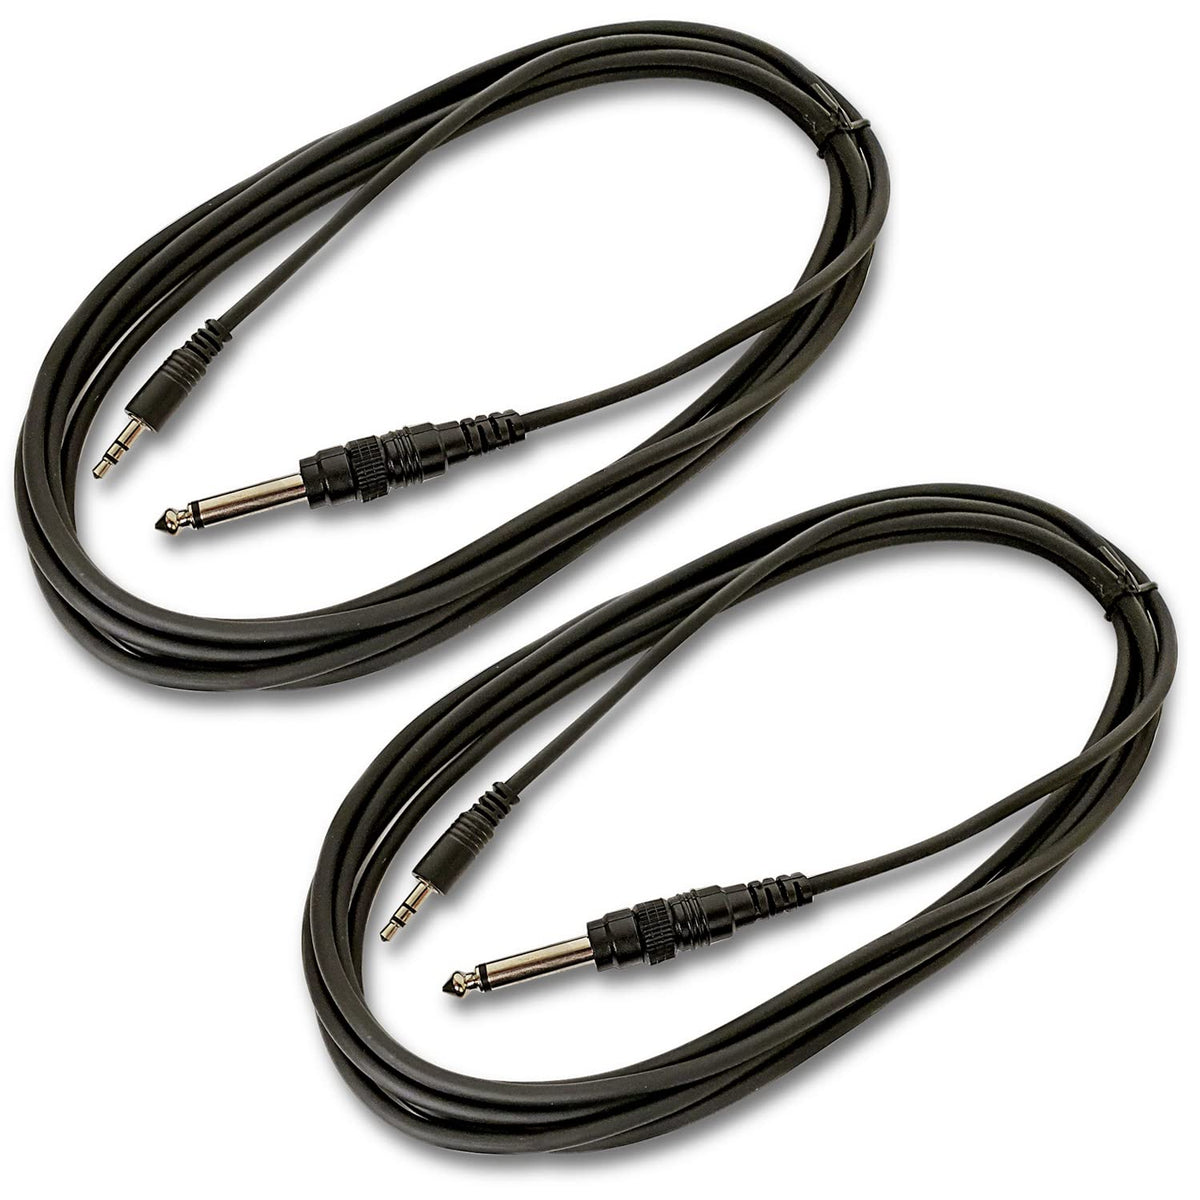 AxcessAbles 1/8 Inch TRS to 1/4 Inch TS Instrument Cable 10ft - 2 Pack | 3.5mm Minijack Male to 6.35mm Male Jack Stereo Audio Cord | 10ft TRS to TS Patch Cables (2-Pack)